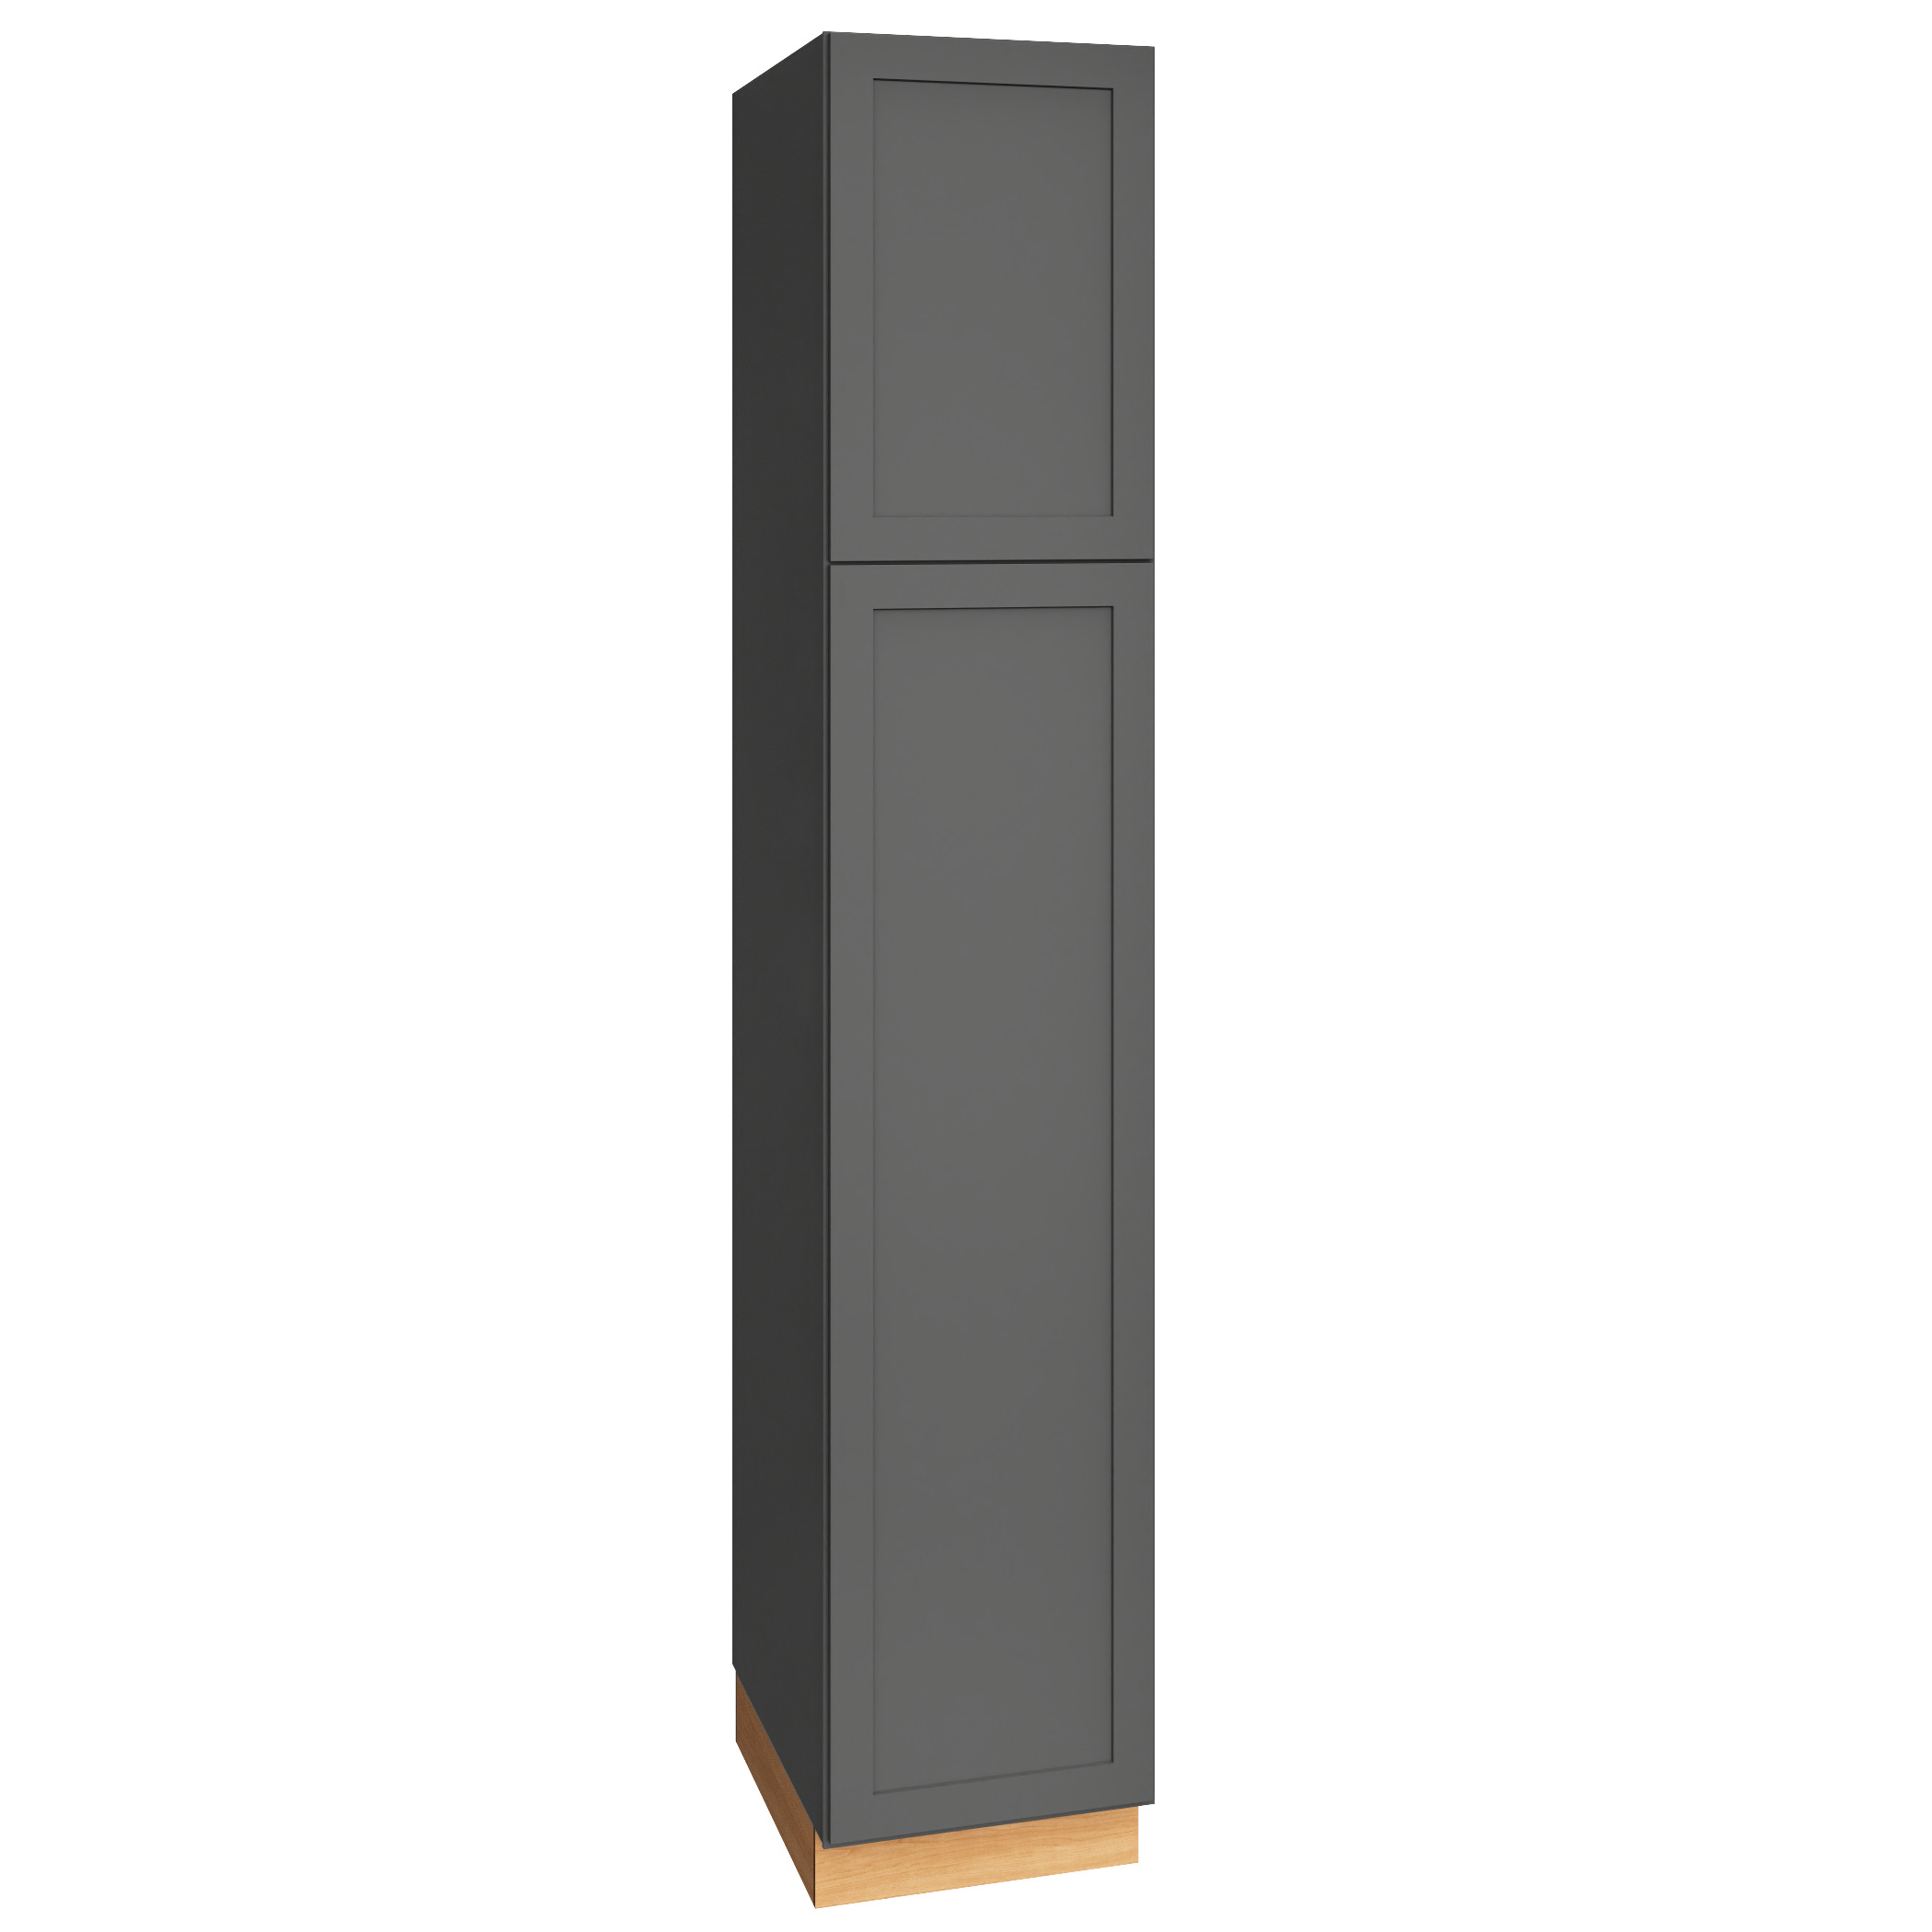 Utility Cabinet With Single Door in Graphite